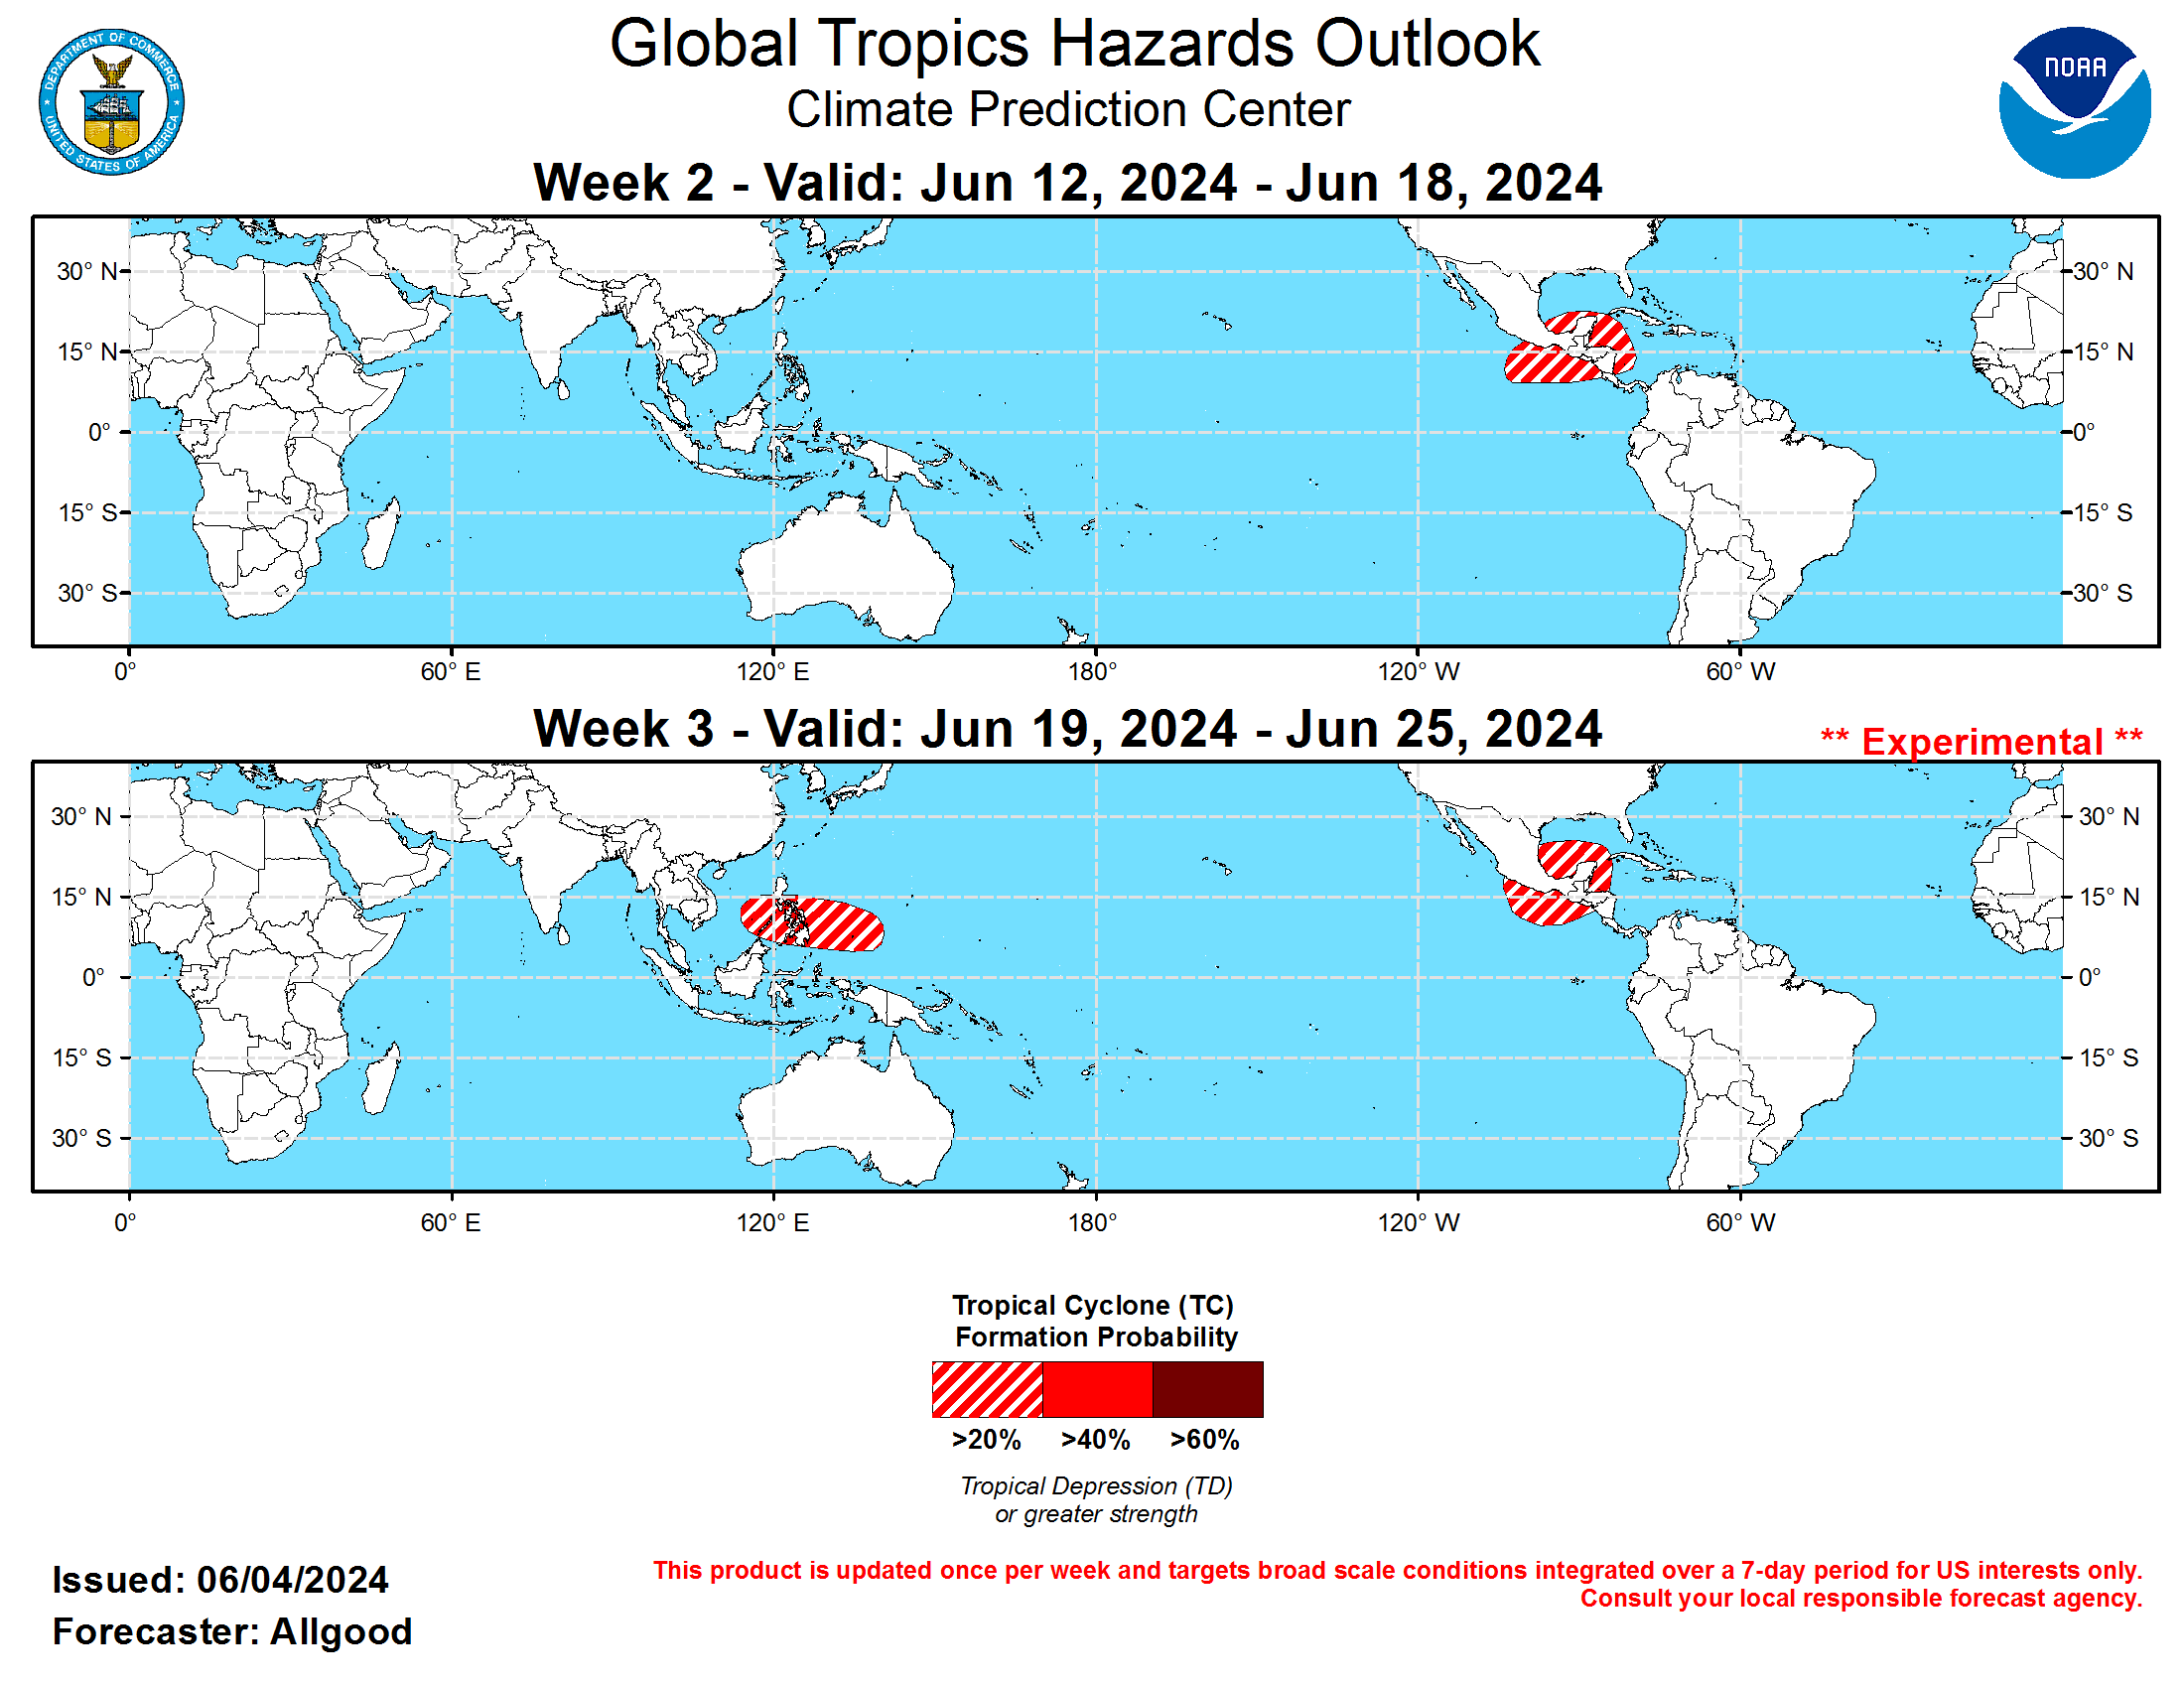 GTH Outlook Discussion Last Updated - 06/04/24 Valid - 06/12/24 - 06/25/24 The Madden-Julian Oscillation (MJO) signal that strengthened last week quickly weakened over the first few days of June. Multiple competing modes of variability resulted in an increasingly incoherent intraseasonal depiction. A Kelvin wave (KW) propagated across the Pacific while the primary MJO enhanced convective envelope remained over the Maritime Continent. Additionally, equatorial Rossby wave (ERW) activity continues to strongly influence the pattern over the Maritime Continent and eastern Indian Ocean, which may have contributed to the sharp “left turn” of the RMM-based MJO index into the unit circle over the past several days. Low frequency signals are also destructively interfering with the MJO, including persistent low-level westerlies over the Indian Ocean and enhanced trades across the equatorial Pacific. While a remnant MJO signal is now nearing the West Pacific, the incoherent structure decreases its predictability moving forward in time.  Dynamical model MJO index forecasts generally depict weak MJO activity over the next several weeks, including the ECMWF, which has backed off on robust MJO activity shown in previous model runs. In contrast to the past month, where much of the signal looped across the Indian Ocean and Maritime Continent, there is a weak presentation of a signal crossing the Pacific during Week-2, and the Western Hemisphere during Week-3. This may help effect a pattern change, with increasing wetness across the tropical Americas and drier conditions across the Indian Ocean basin.  The Joint Typhoon Warning Center upgraded a system over the South China Sea to tropical depression status just prior to landfall over southeastern China last week. Elsewhere, no tropical cyclones developed. Global accumulated cyclone energy (ACE), a metric depicting tropical cyclone activity, remains below average for the calendar year. During Week-2, any remnant MJO activity coupled with an increasingly active Central American Gyre (CAG) may increase the potential for early season tropical cyclone development, either across the far East Pacific basin, the far western Caribbean, or the southern Gulf of Mexico. A decaying frontal boundary draped across the western Atlantic may provide a source for potential tropical cyclone development near or north of the Bahamas, but potential is too low to include a hazard on this outlook. Across the Eastern Hemisphere, with a fairly weak monsoon trough in place and an active Meiyu Front feature, there is a low potential for tropical cyclone development. During Week-3, a similar pattern is favored to remain in place across the East Pacific and western Atlantic basins, and there is an increasing signal in both the GEFS and ECMWF supporting a potential for tropical cyclone development in the vicinity of the Philippines.